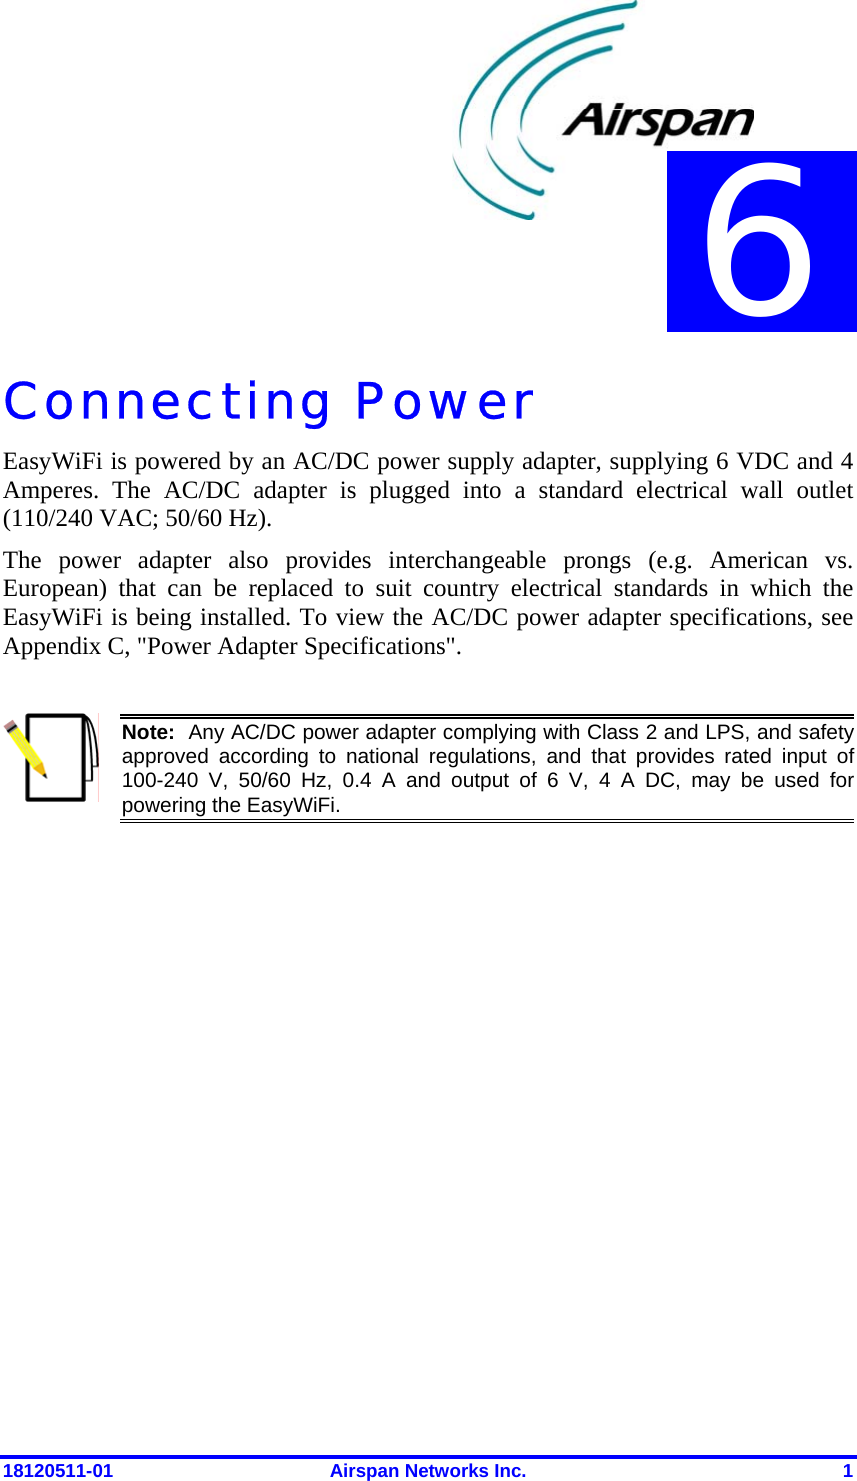  18120511-01  Airspan Networks Inc.  1 Connecting Power EasyWiFi is powered by an AC/DC power supply adapter, supplying 6 VDC and 4 Amperes. The AC/DC adapter is plugged into a standard electrical wall outlet (110/240 VAC; 50/60 Hz).  The power adapter also provides interchangeable prongs (e.g. American vs. European) that can be replaced to suit country electrical standards in which the EasyWiFi is being installed. To view the AC/DC power adapter specifications, see Appendix C, &quot;Power Adapter Specifications&quot;.   Note:  Any AC/DC power adapter complying with Class 2 and LPS, and safety approved according to national regulations, and that provides rated input of 100-240 V, 50/60 Hz, 0.4 A and output of 6 V, 4 A DC, may be used for powering the EasyWiFi.   6 